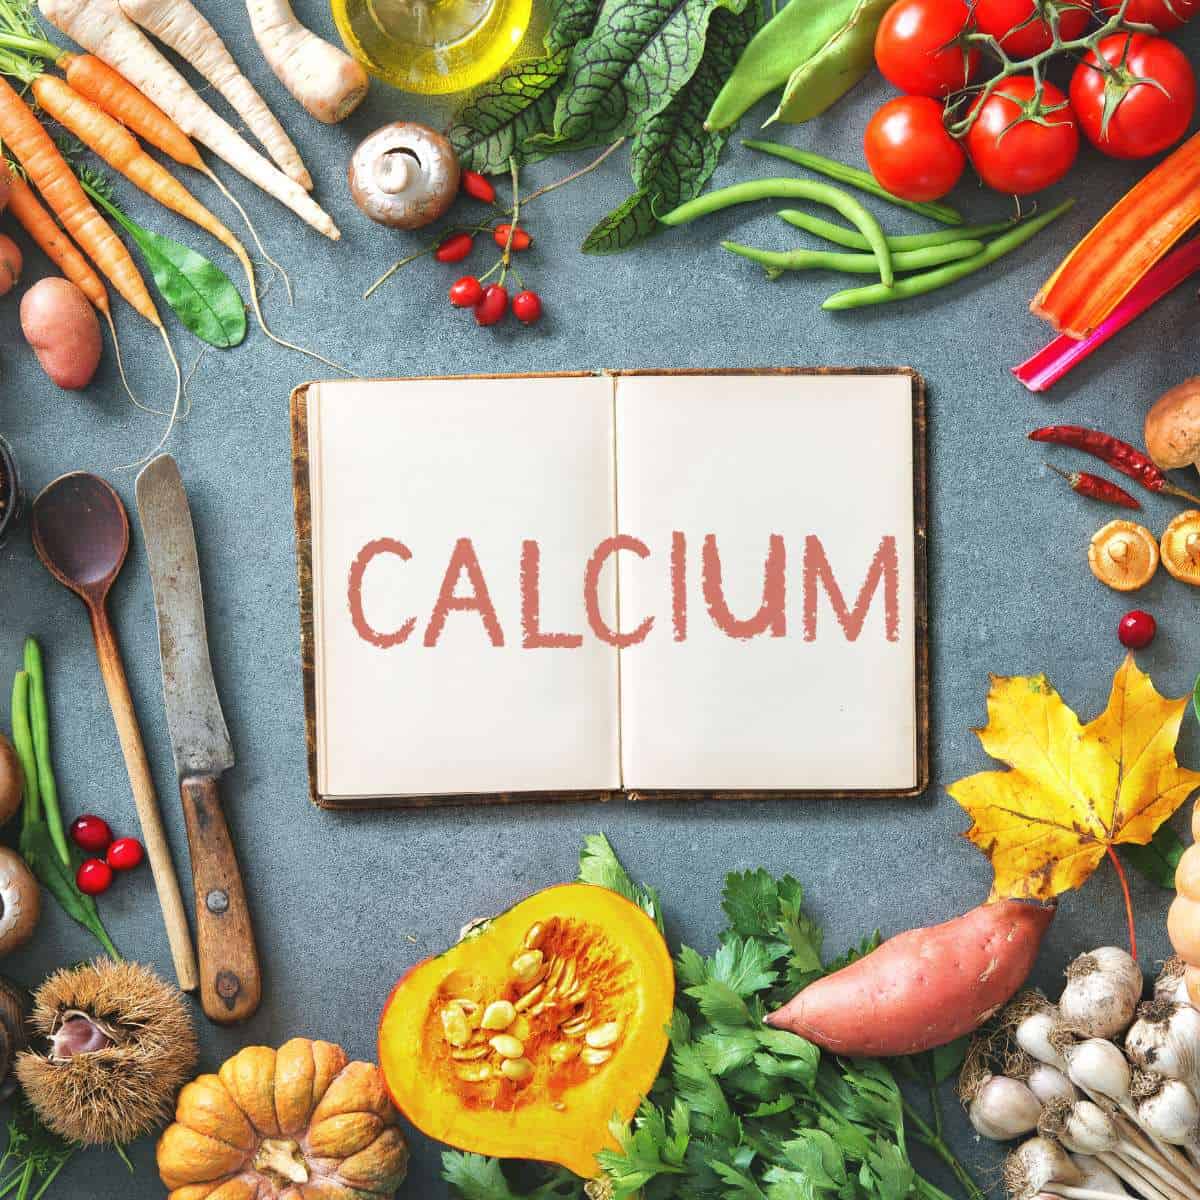 Vegan Calcium: The Ultimate Guide to the Best Plant-Based Sources